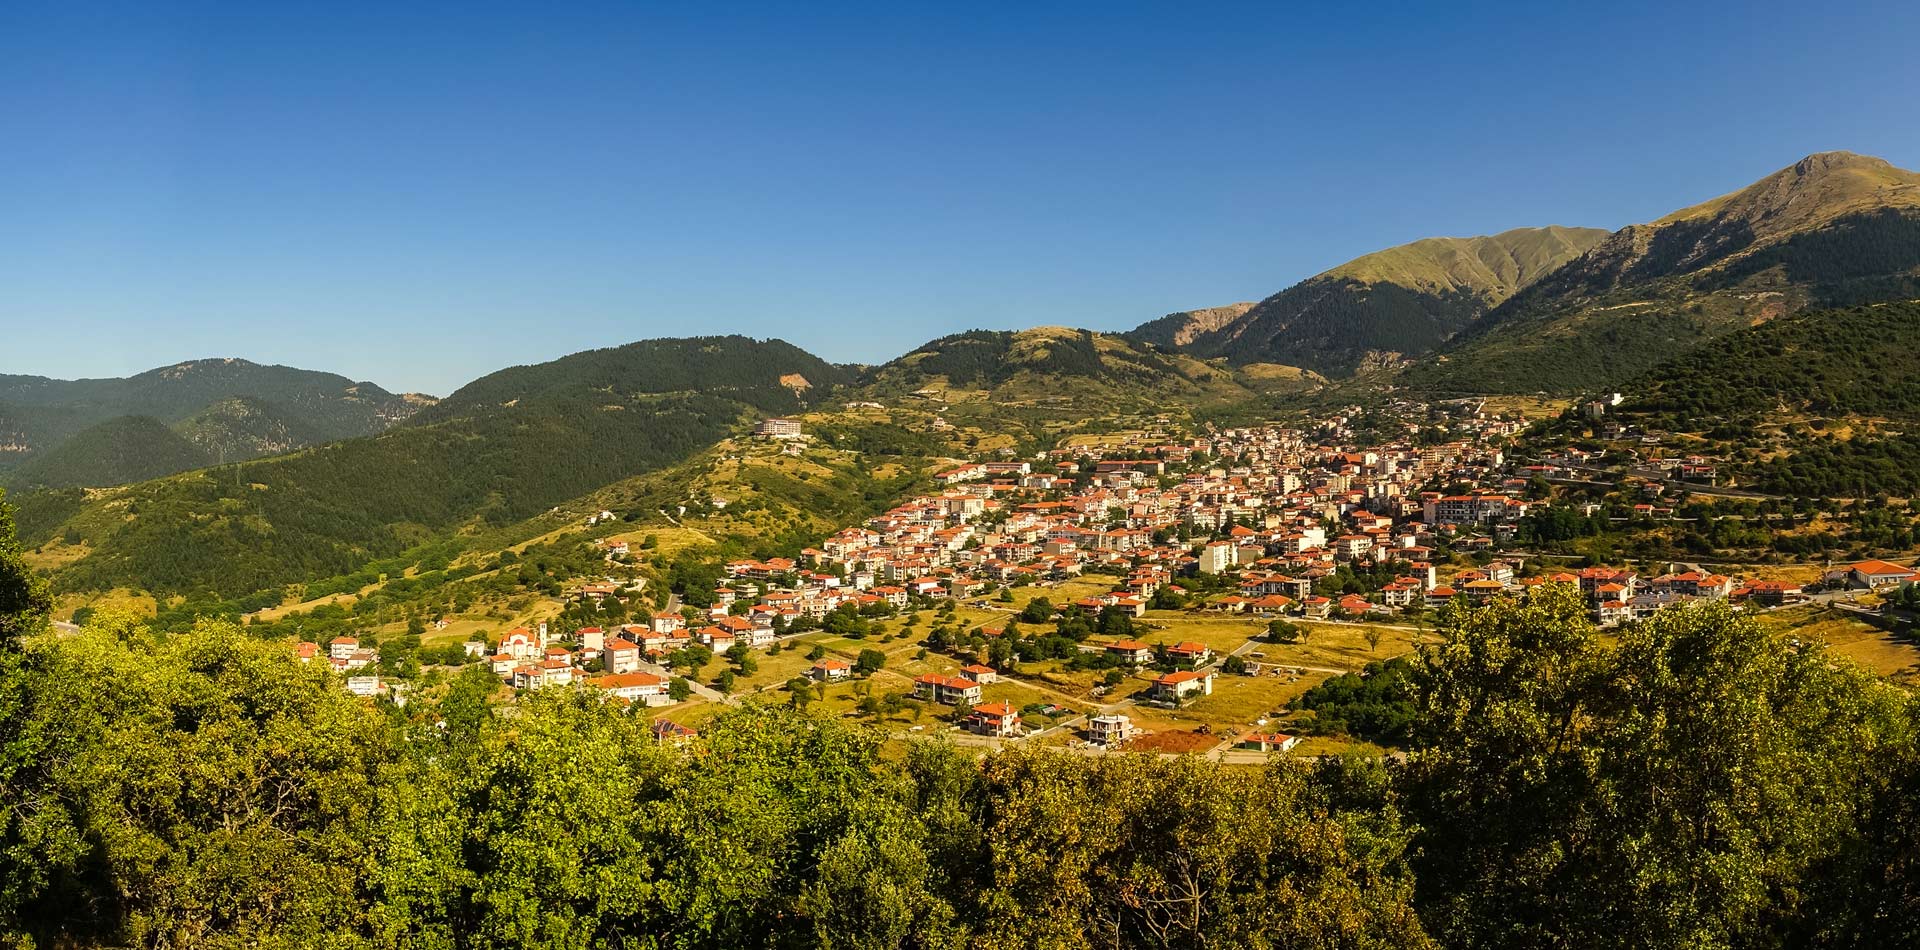 Panoramic view of a village in the mountains.